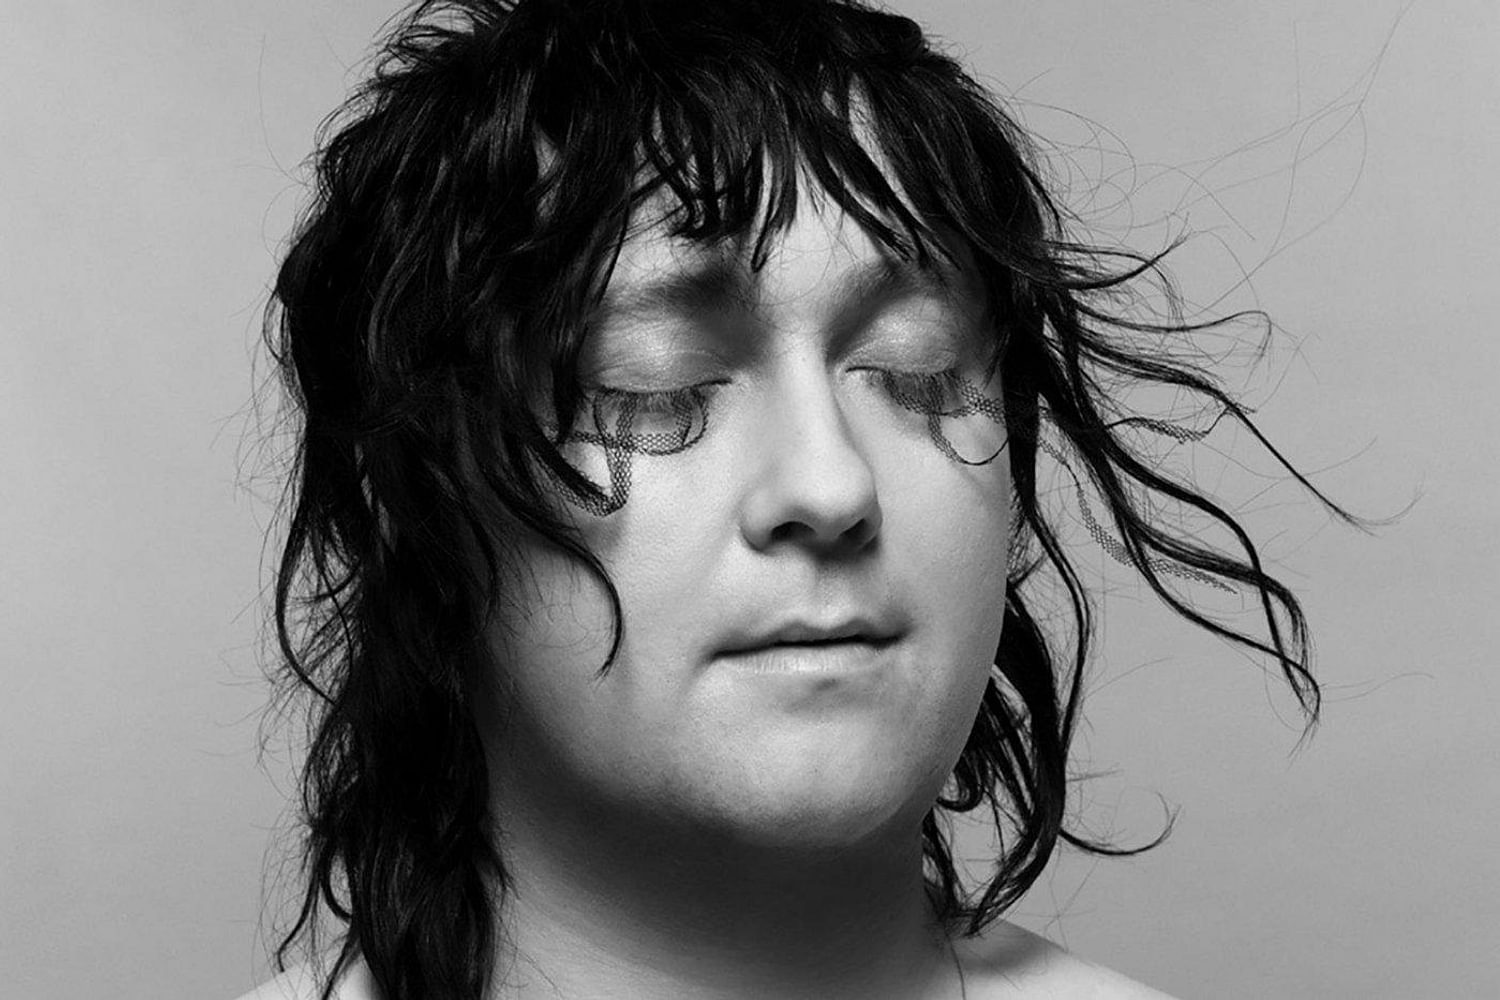 ​Anohni shares sparse new video for ‘I Don’t Love You Anymore’